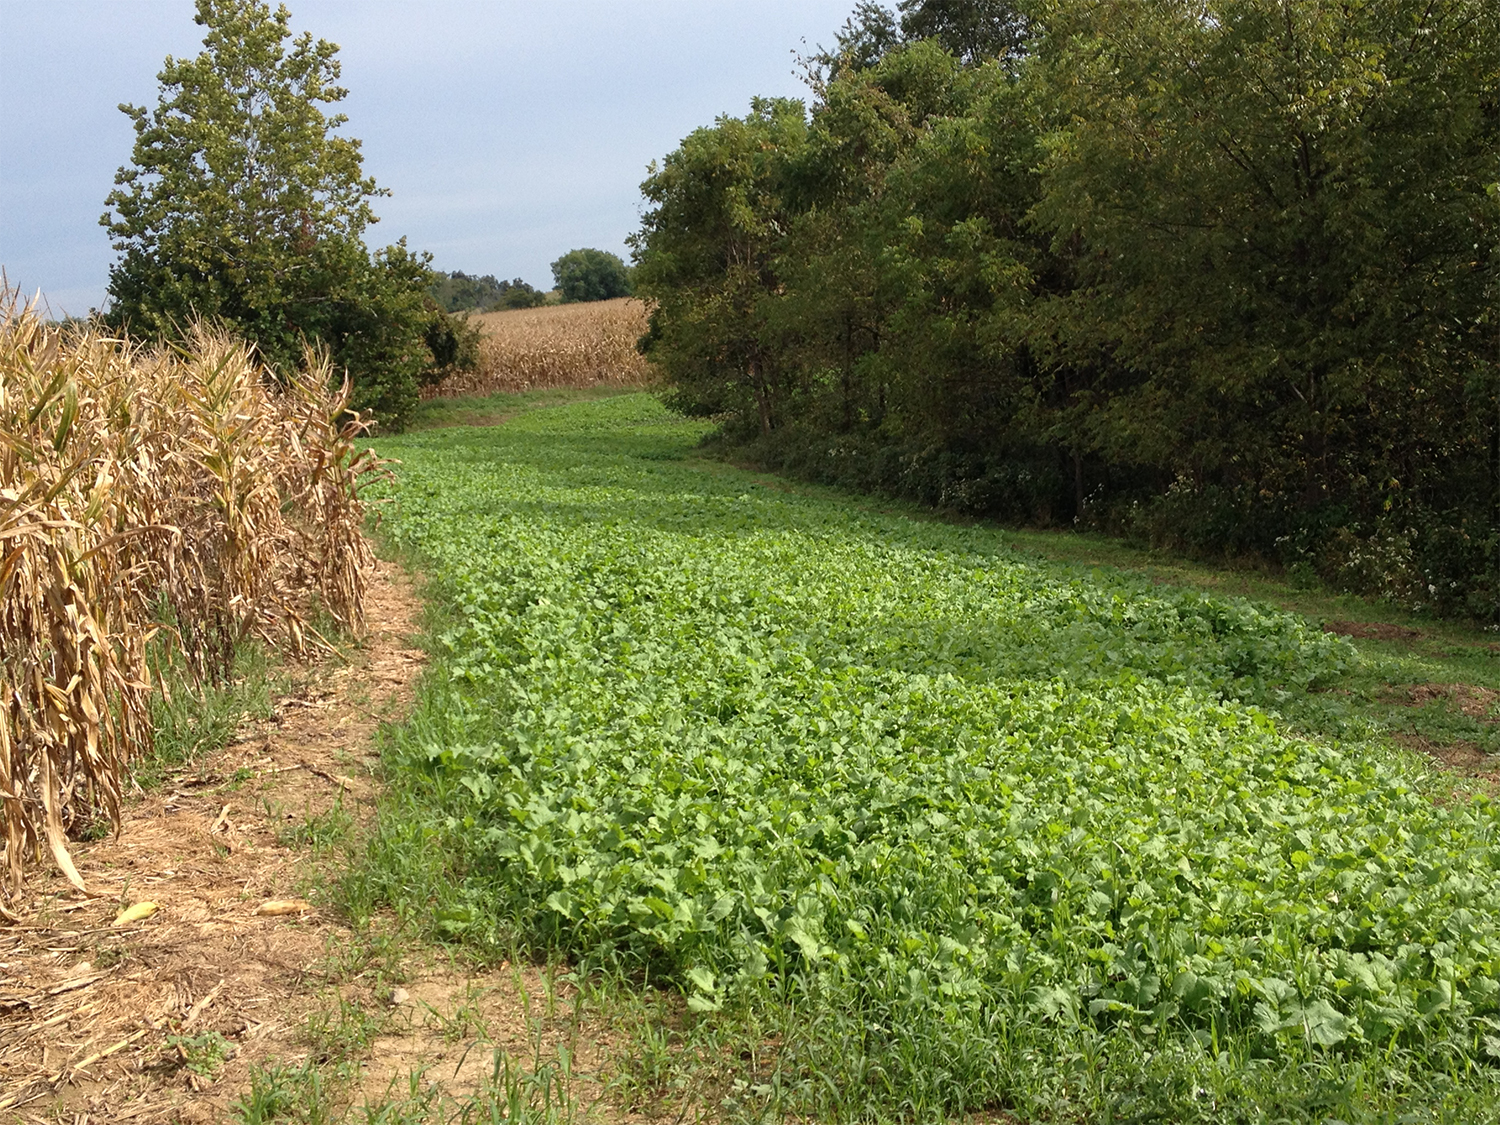 A narrow stretch of deer food plot between a tree line and a corn field.